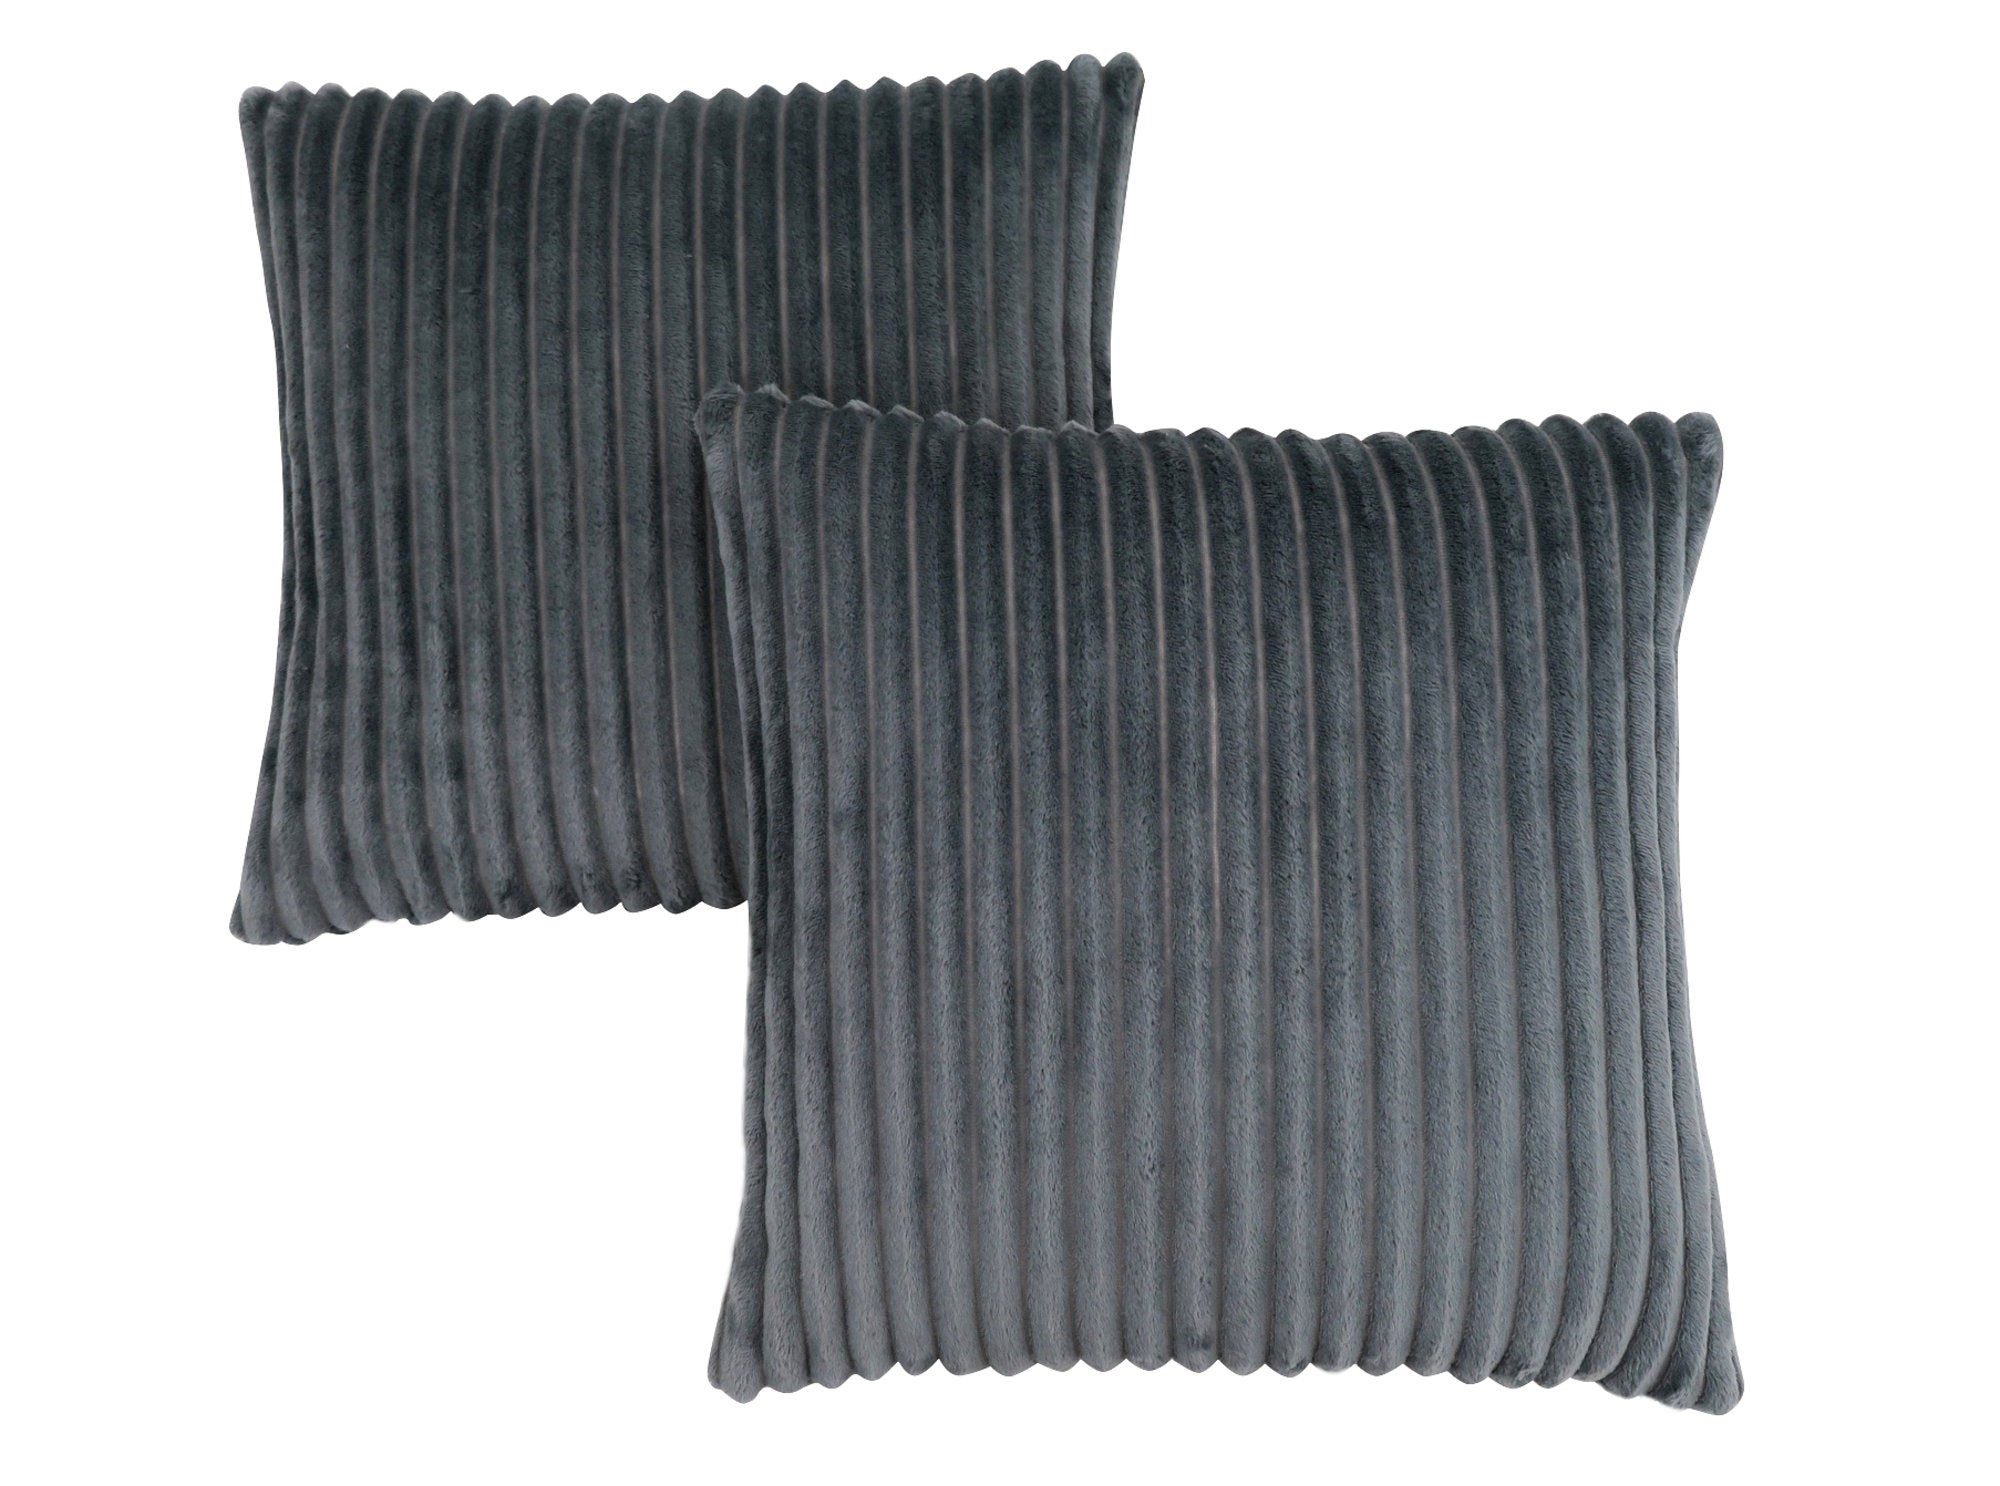 MN-949353    Pillows, Set Of 2, 18 X 18 Square, Insert Included, Decorative Throw, Accent, Sofa, Couch, Bed, Faux Fur Polyester Fabric, Hypoallergenic Soft Polyester Insert, Grey, Transitional